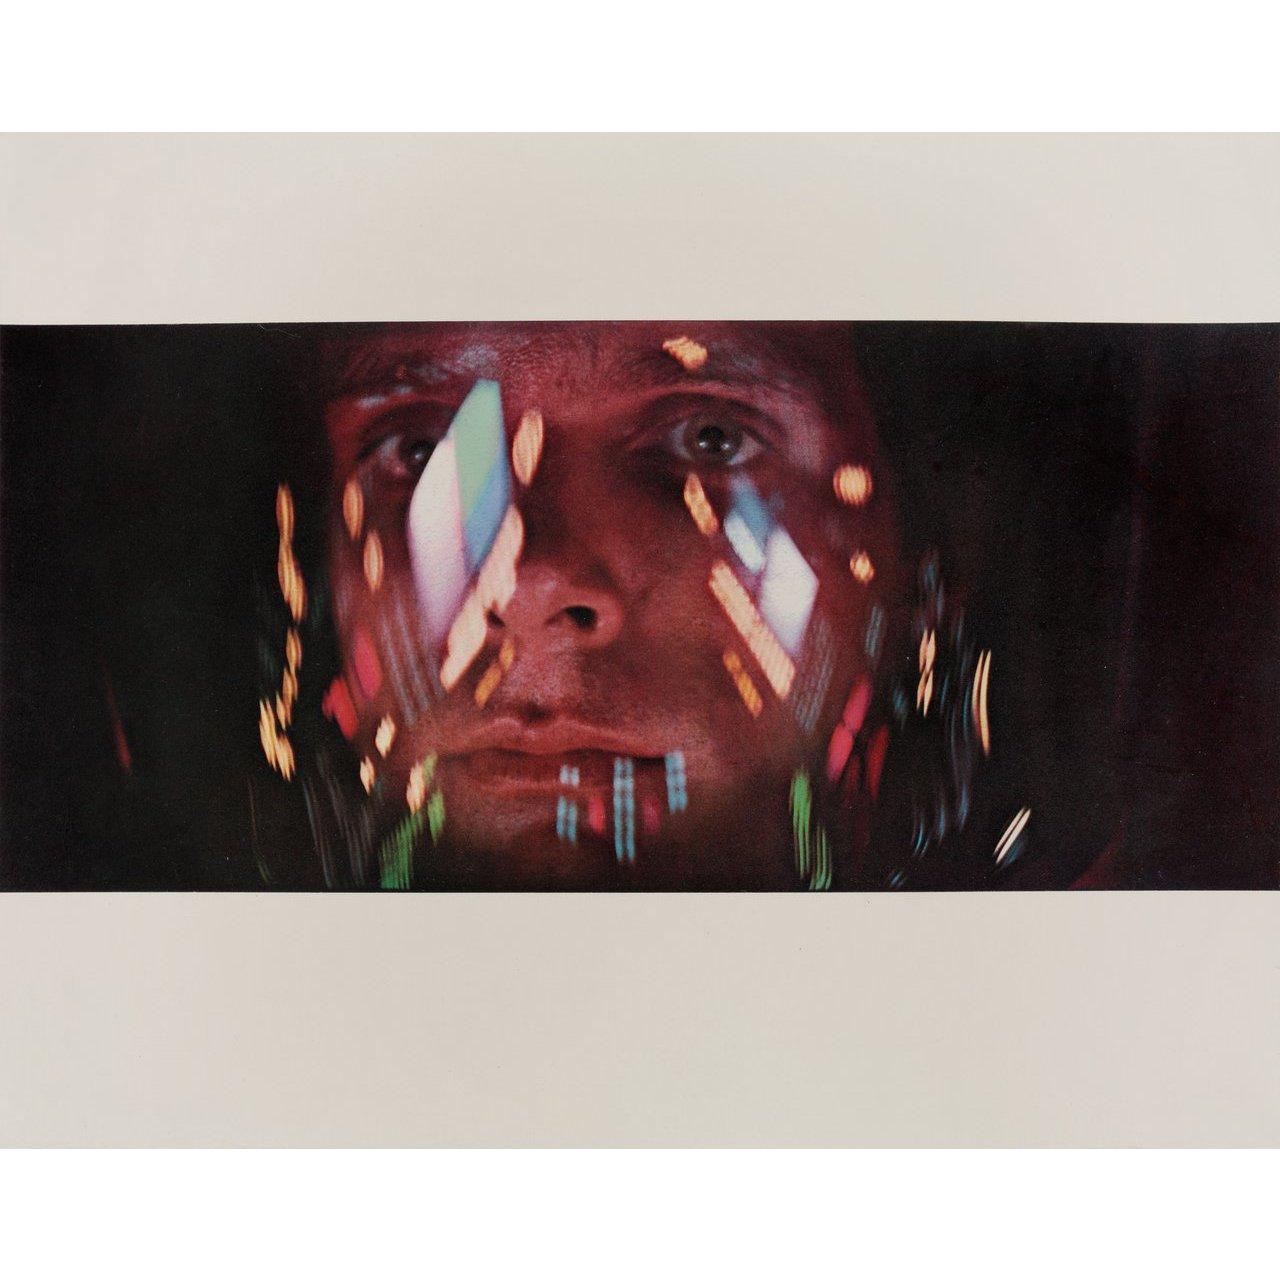 American 2001: A Space Odyssey 1968 U.S. Jumbo Color Photo For Sale